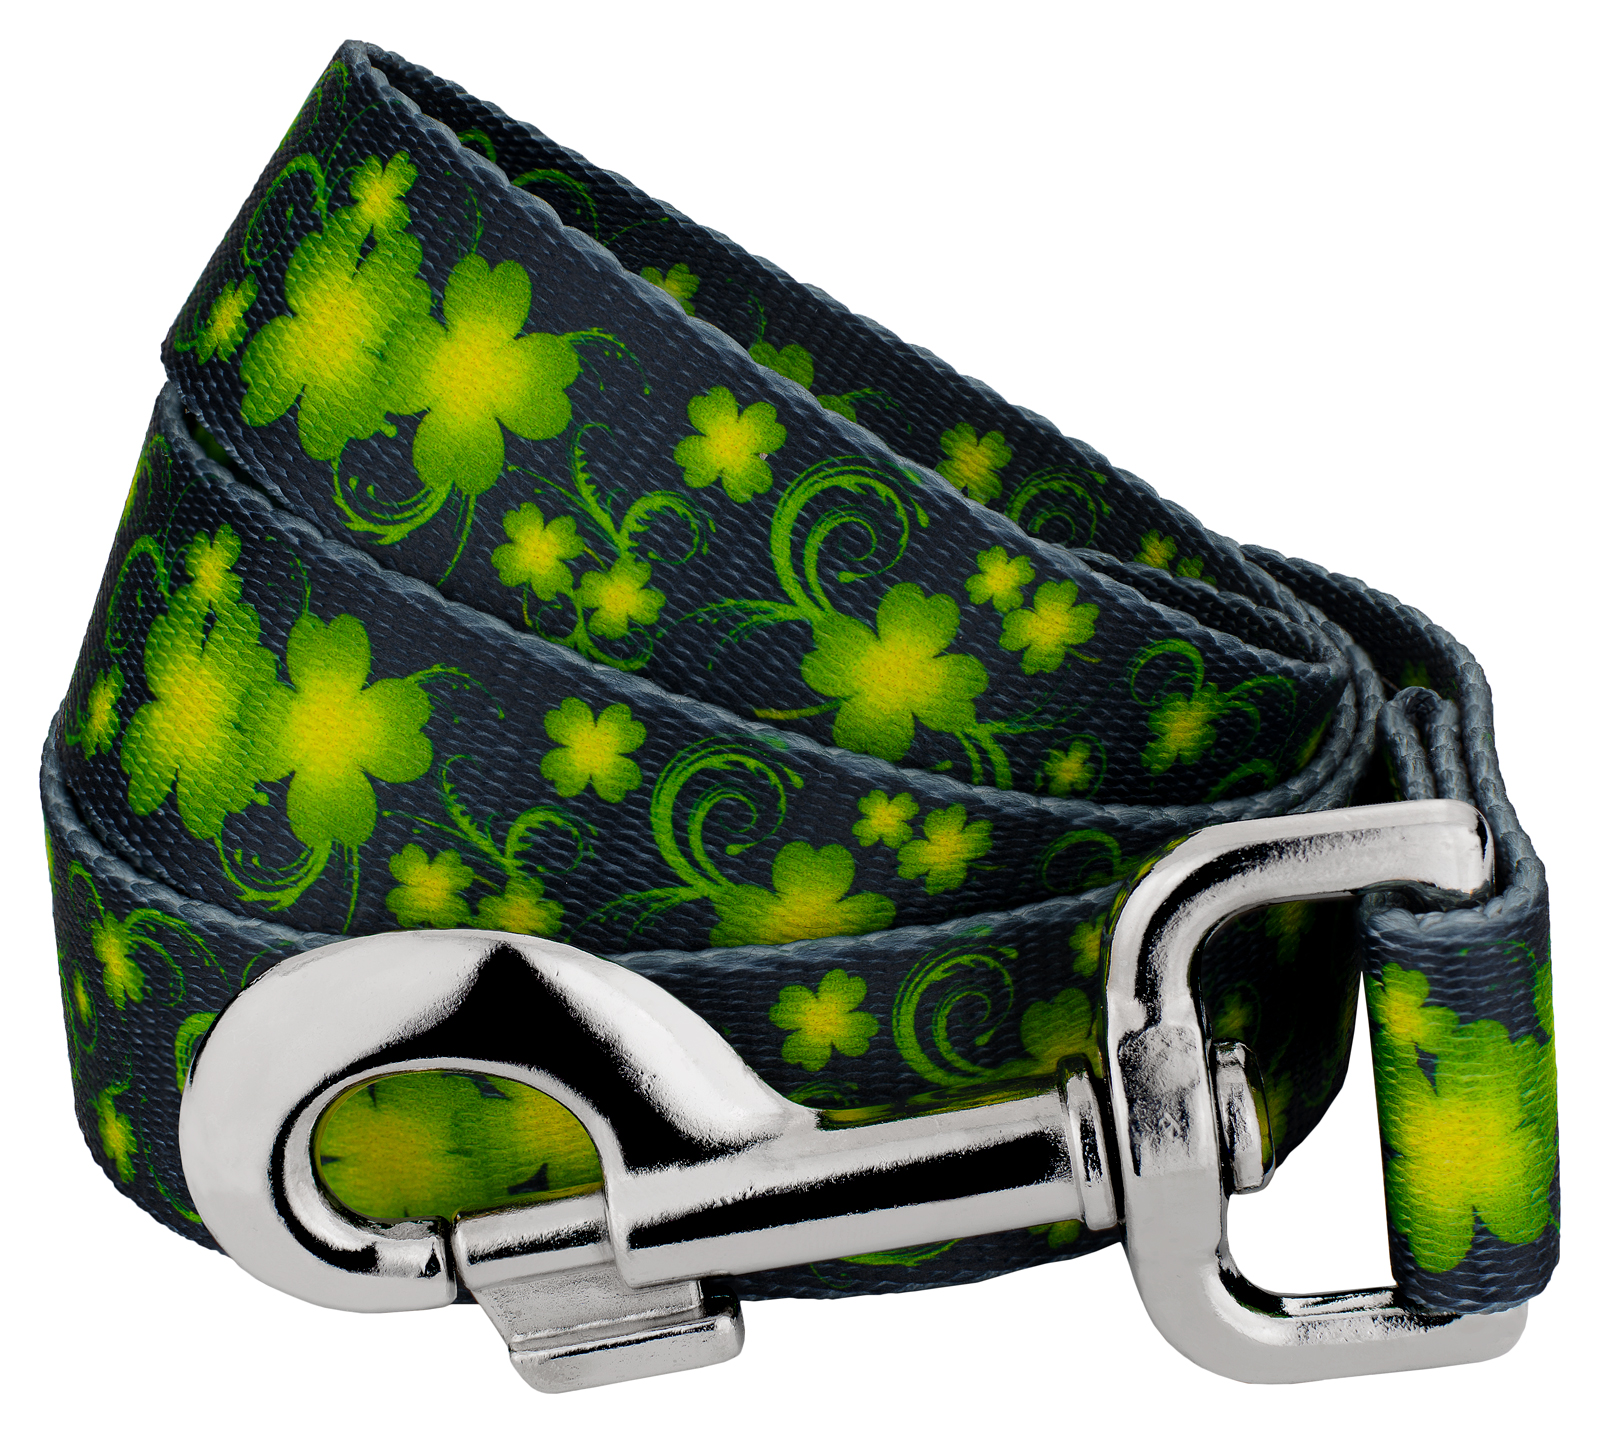 Country Brook Petz - Clovers In The Wind Dog Leash - Irish Pride Collection with 2 Lucky Designs (4 Foot, 1 inch Wide) - image 1 of 3